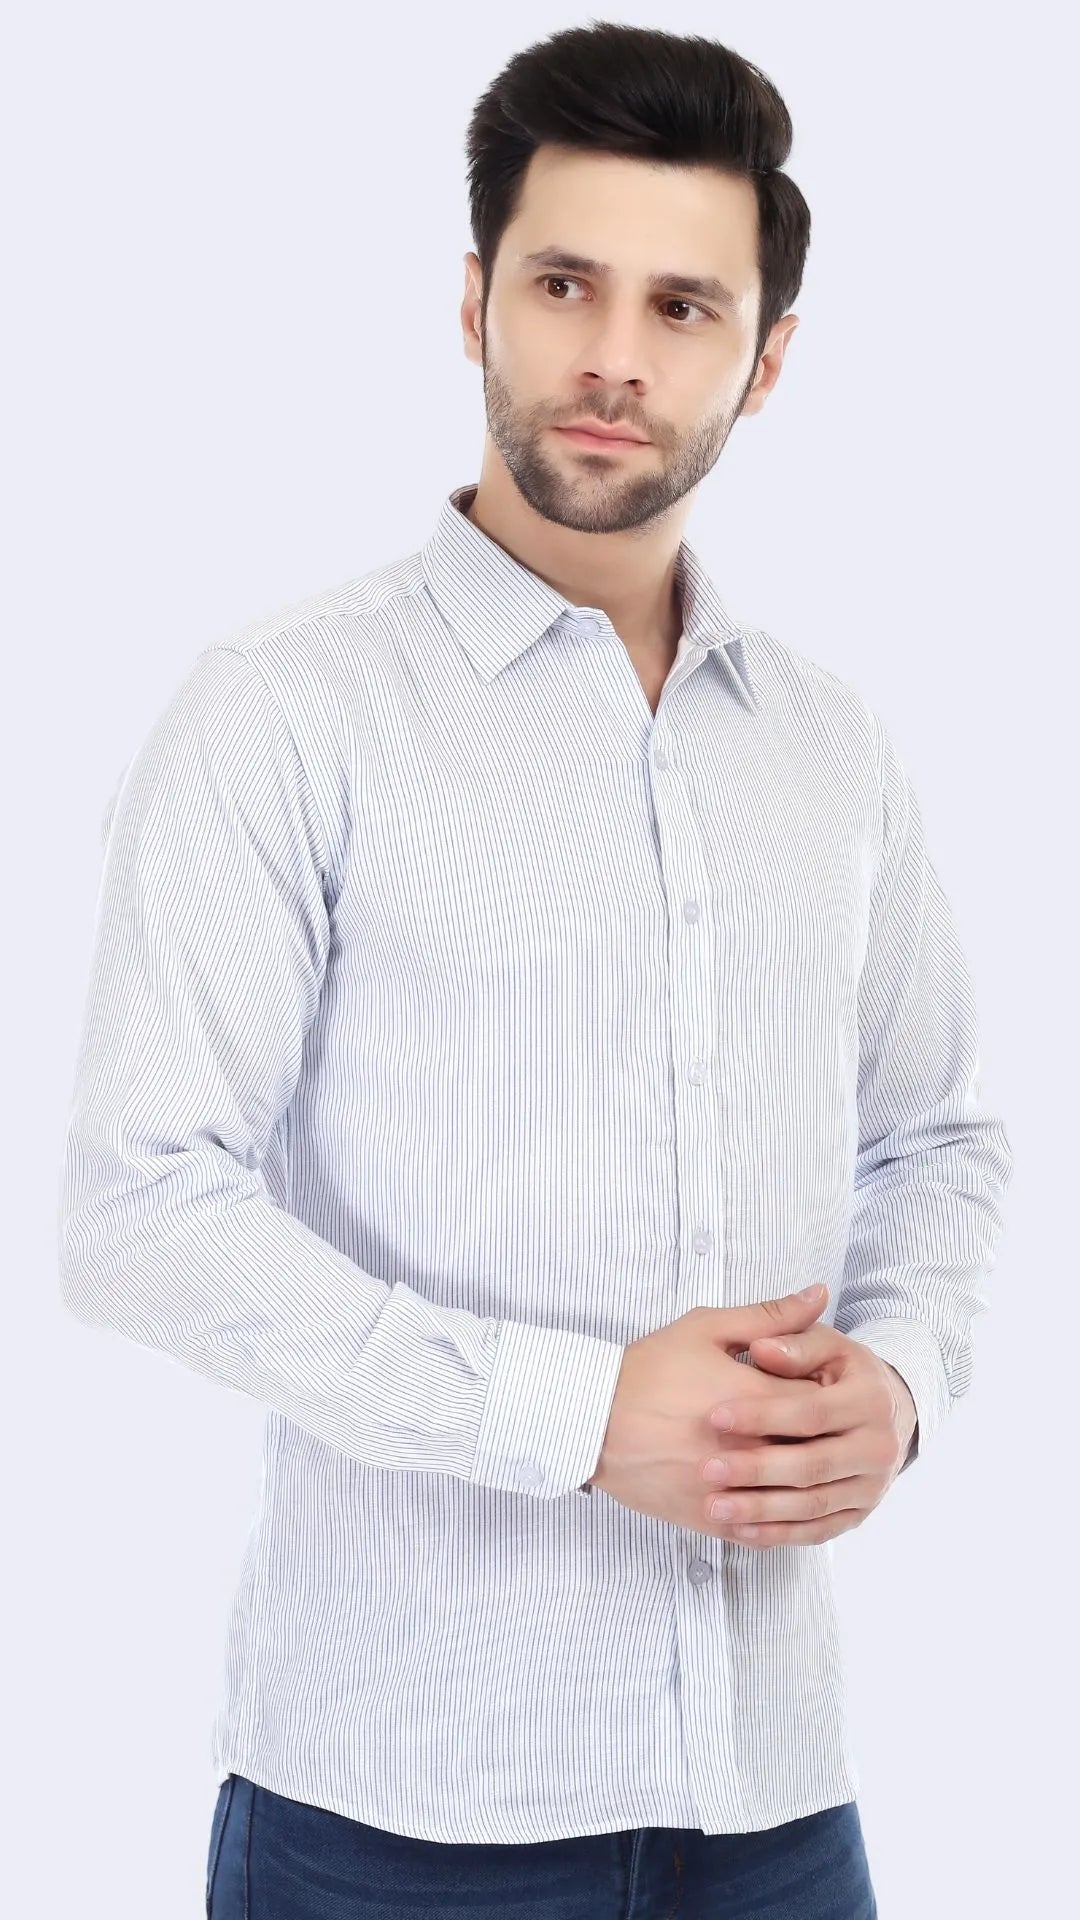 Stripes shirt for office by FD